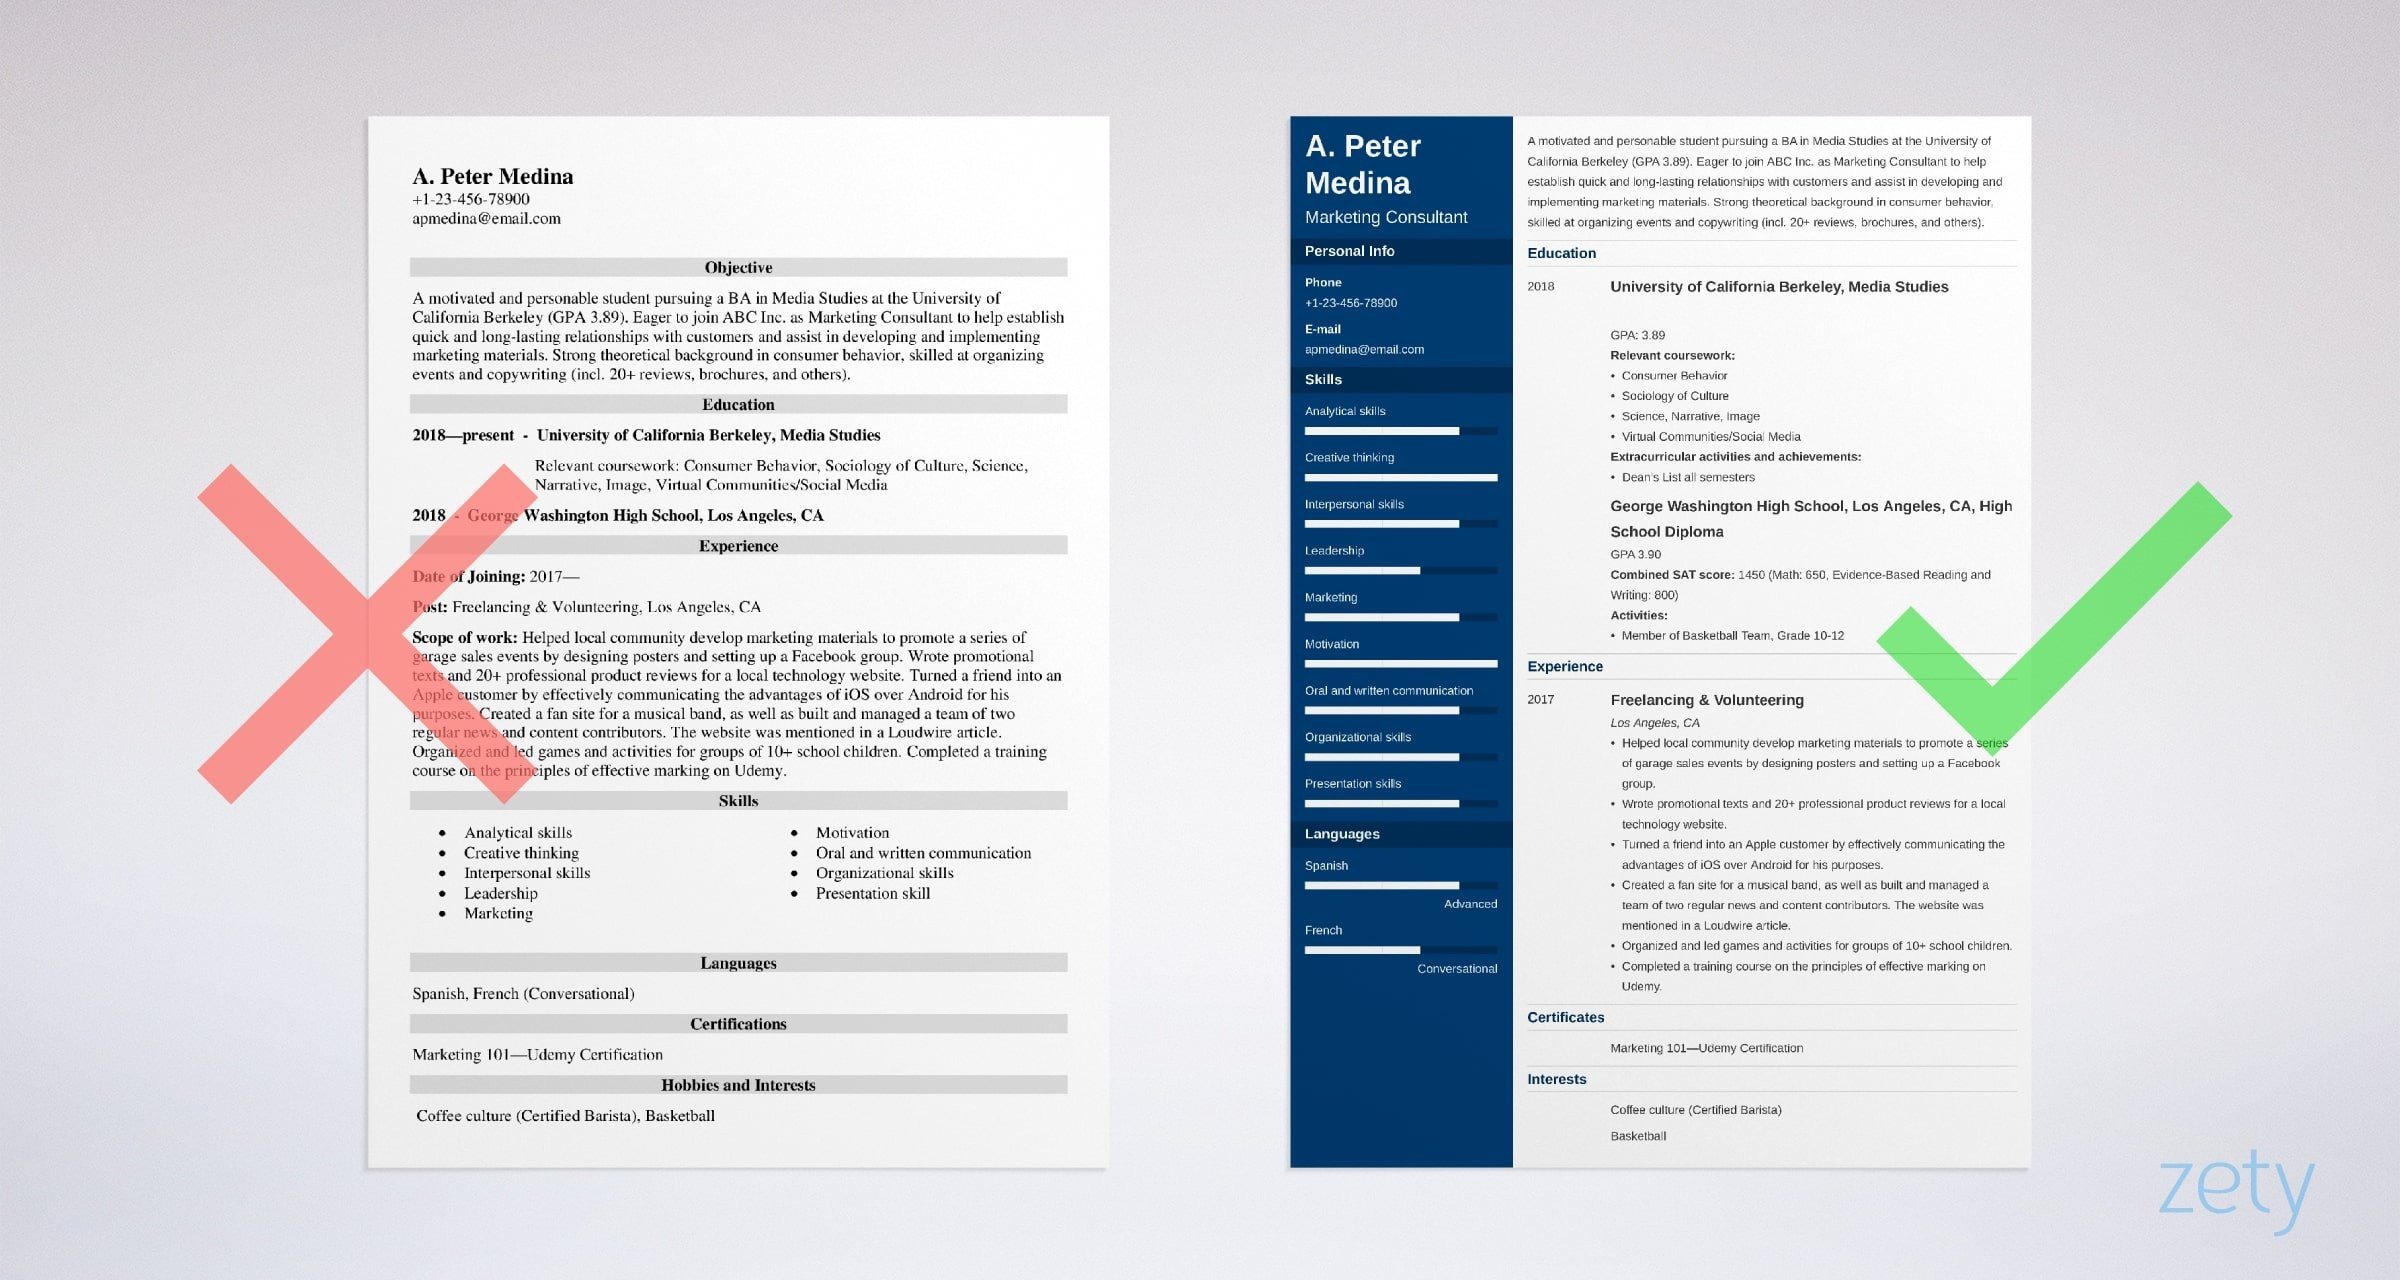 Sample Resume Objectives with No Work Experience How to Write A Resume with No Experience & Get the First Job